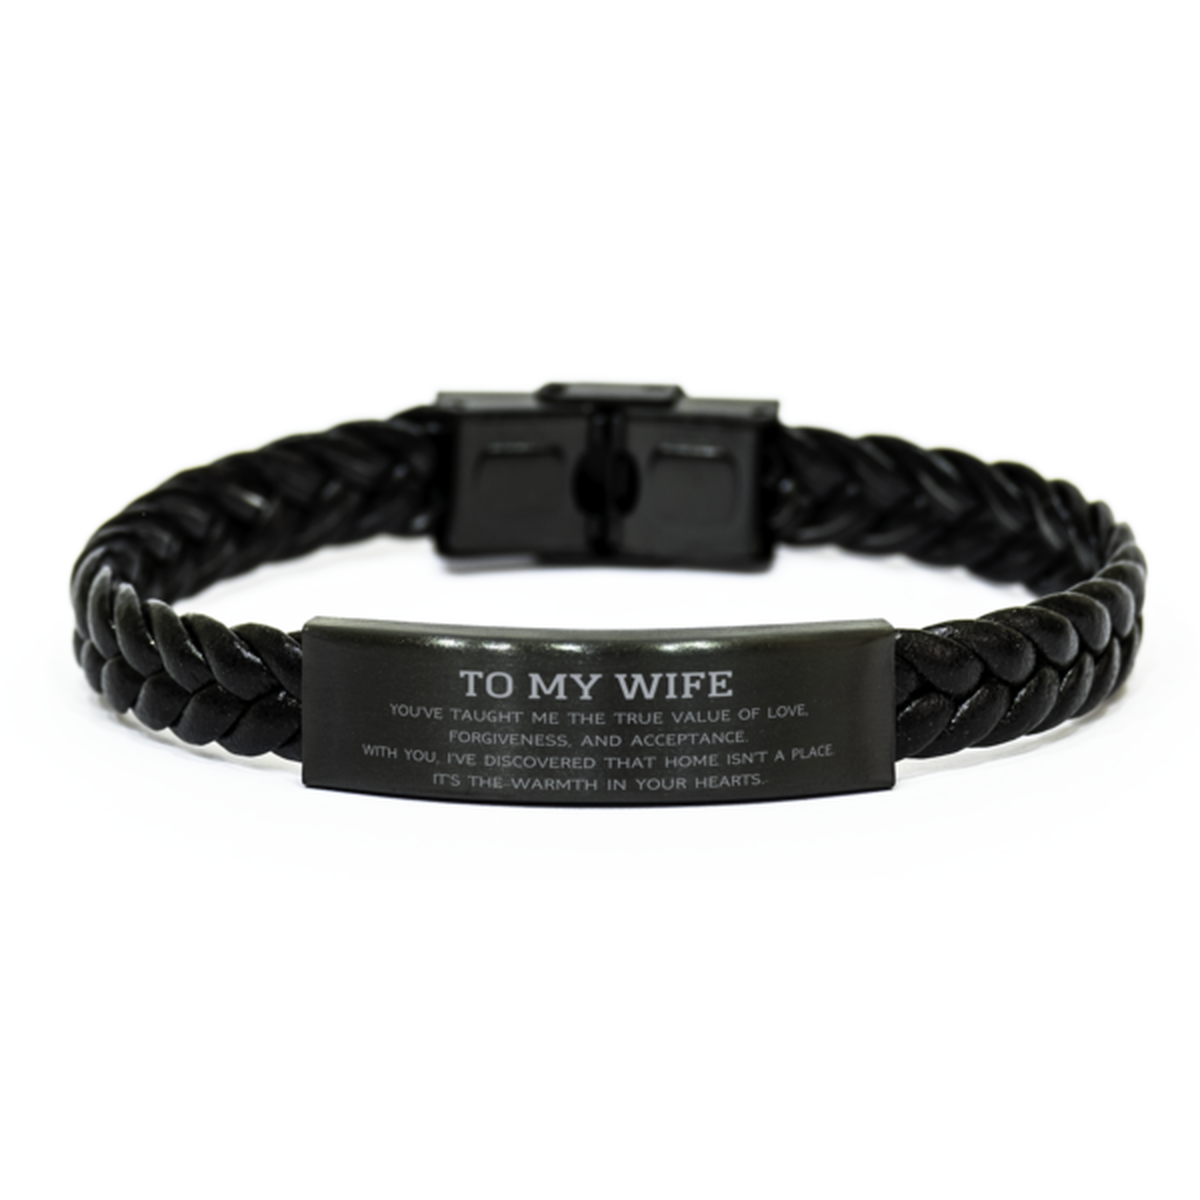 To My Wife Gifts, You've taught me the true value of love, Thank You Gifts For Wife, Birthday Braided Leather Bracelet For Wife